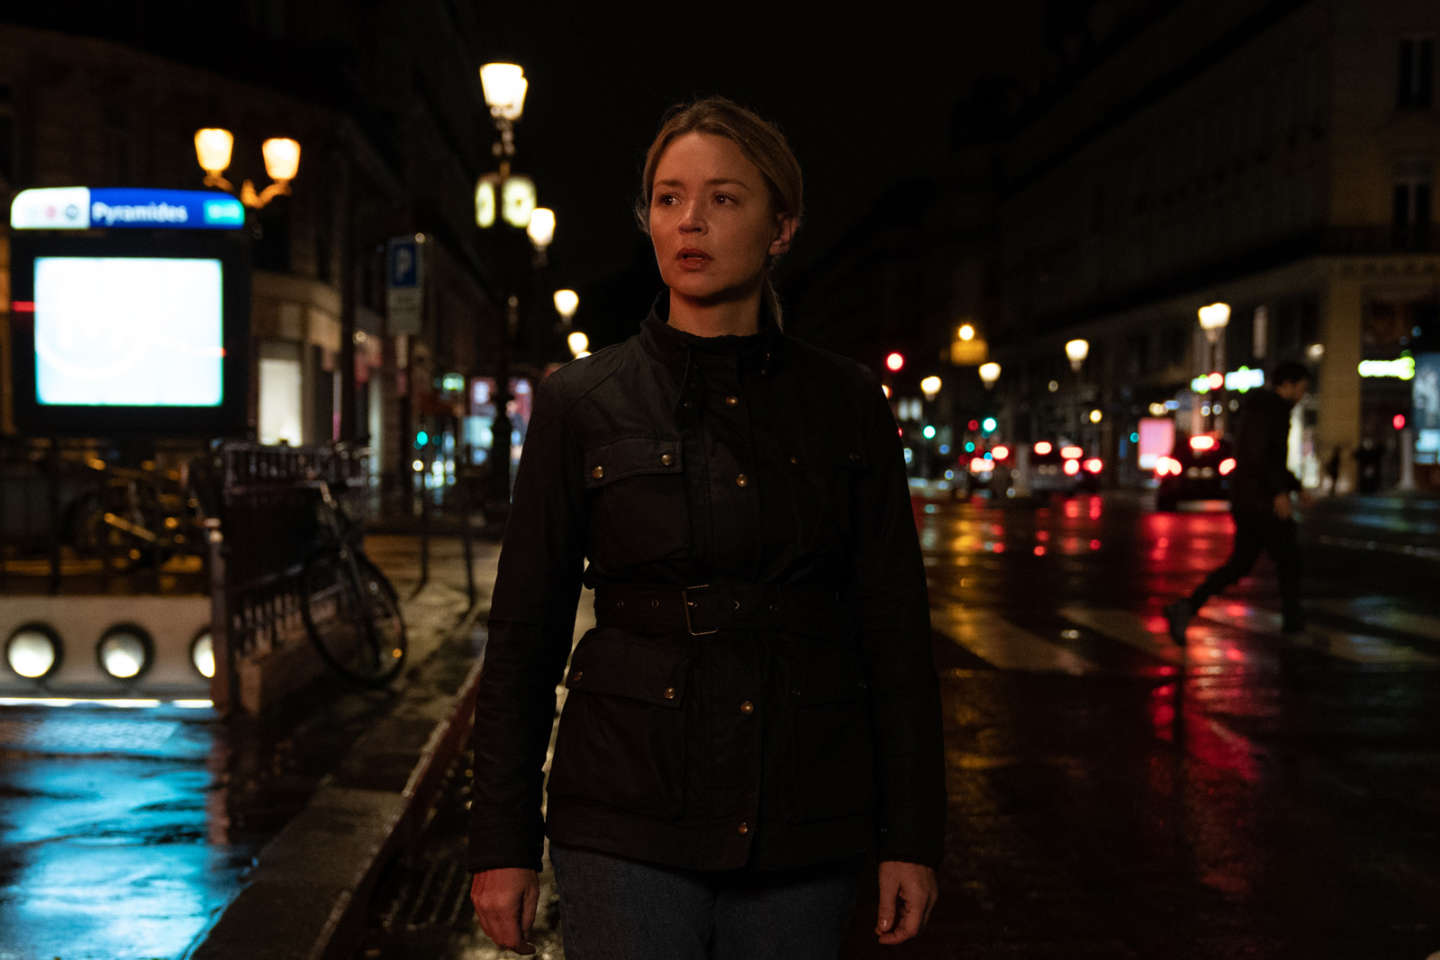 “Revoir Paris”, on Canal +: Virginie Efira as the victim of an attack, who is relearning to live in the capital